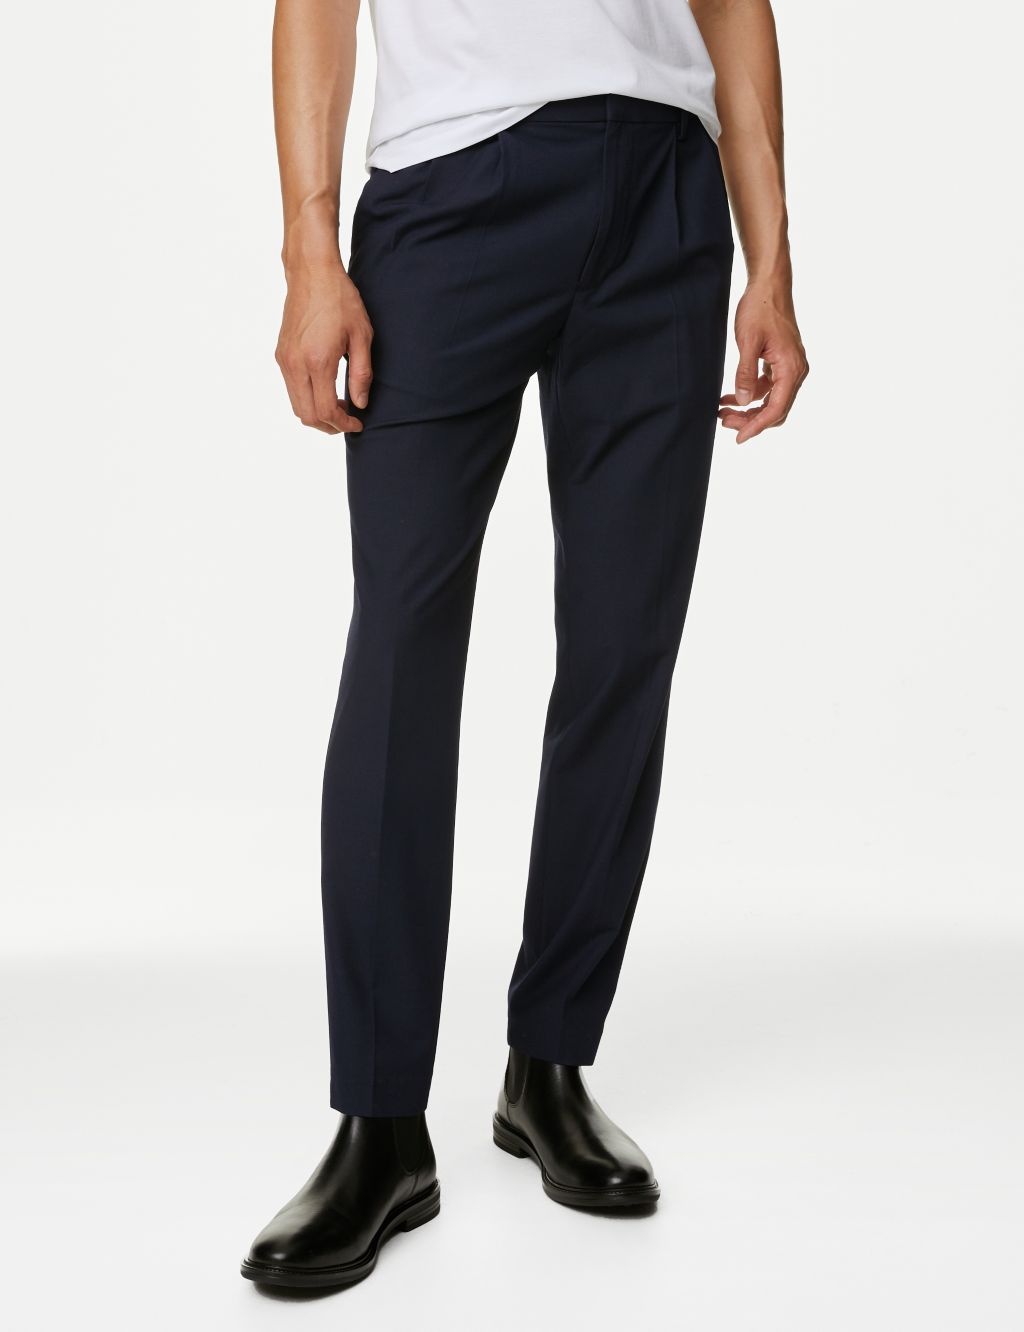 Twin Pleat Stretch Trousers image 2